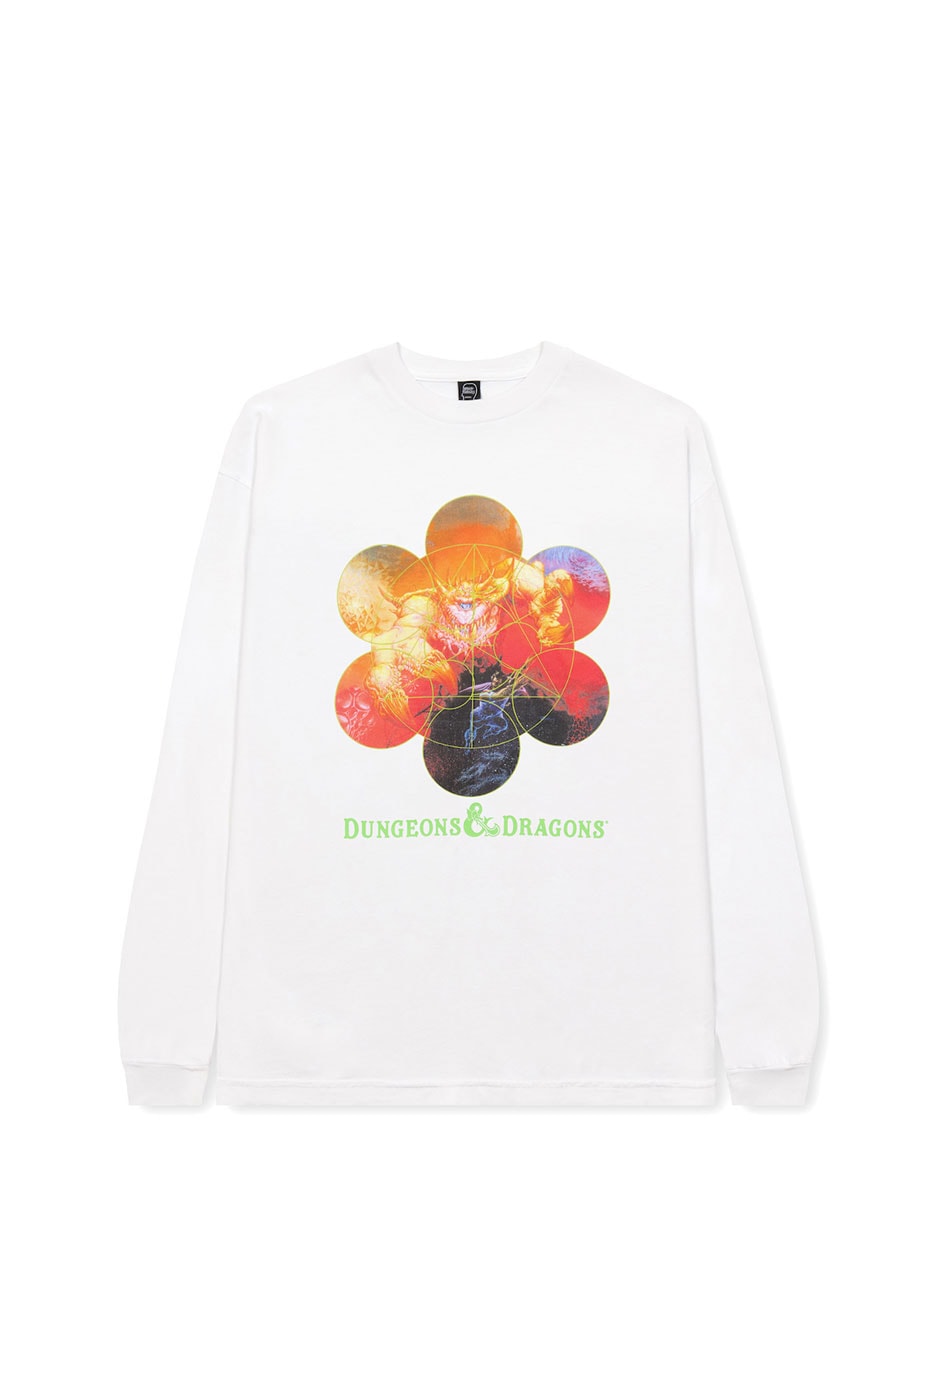 Brain Dead Dungeon And Dragons Capsule Collection Release Buy Info Dover Street Market Hoodies Tshirts Beanie Cap